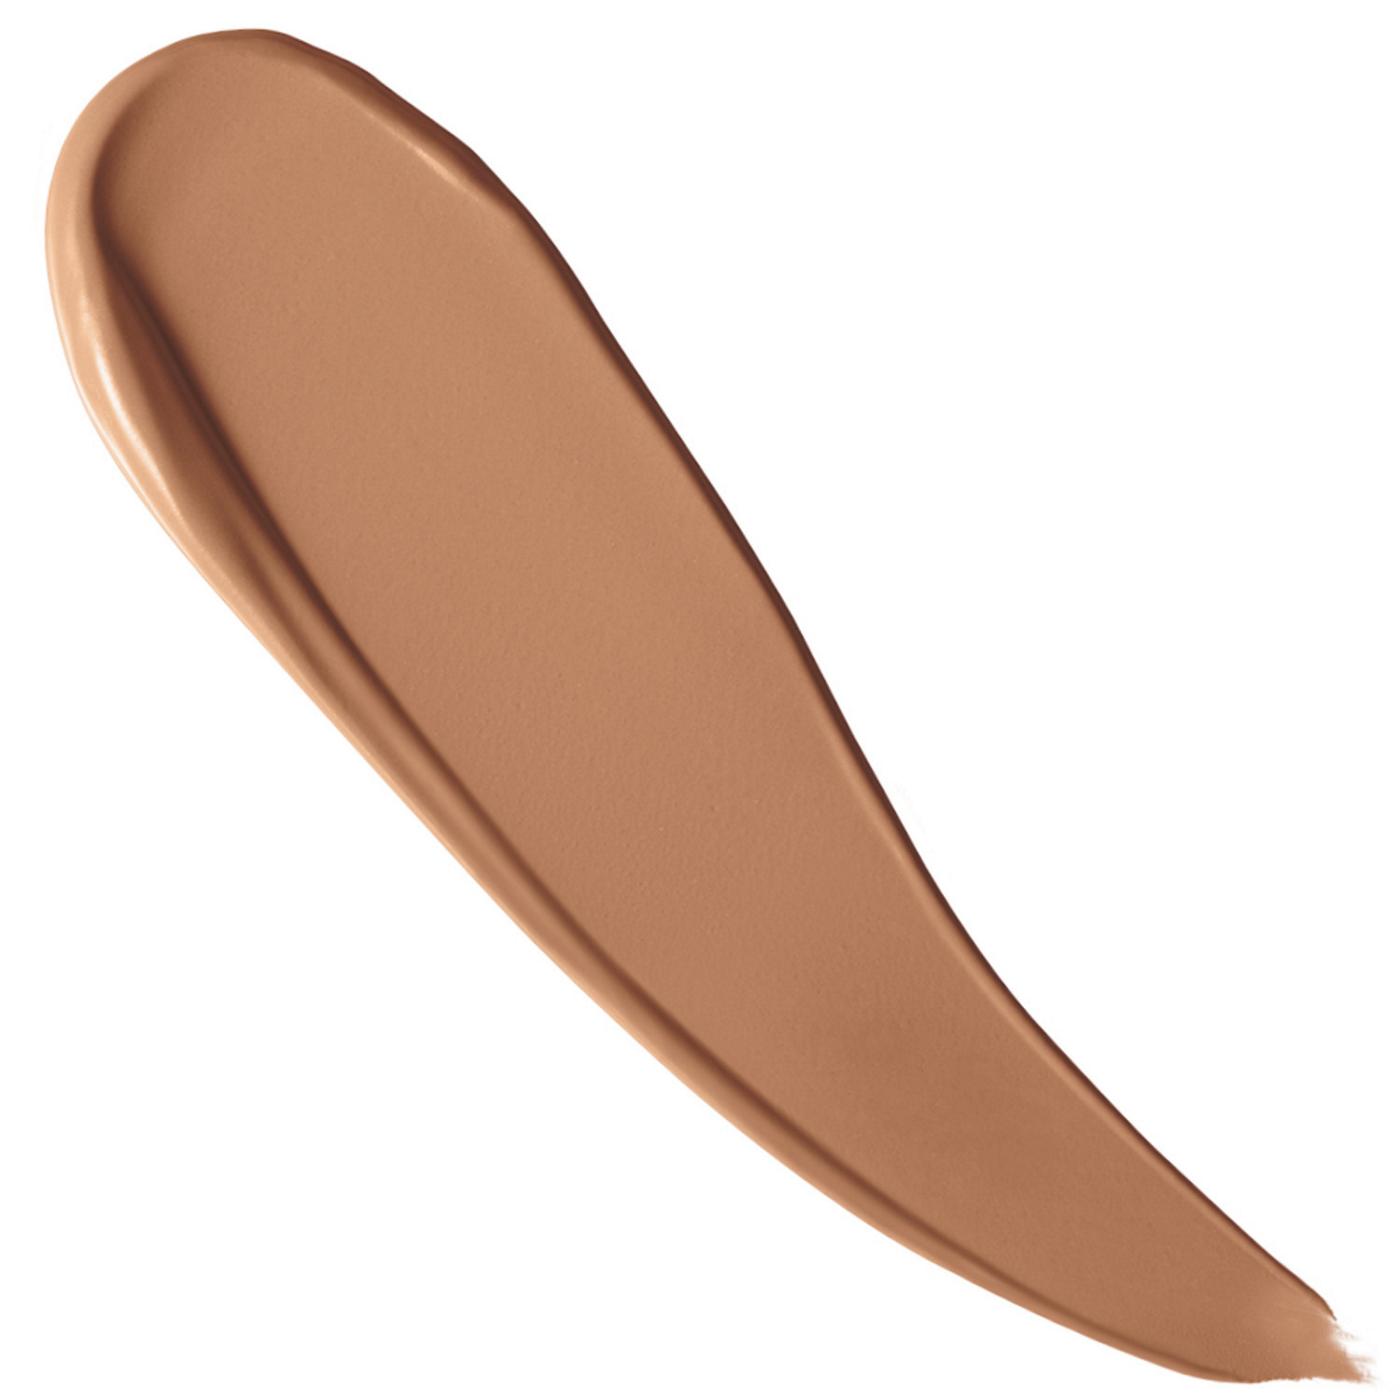 Covergirl Simply Ageless 3-in-1 Liquid Foundation 260 Classic Tan; image 4 of 6